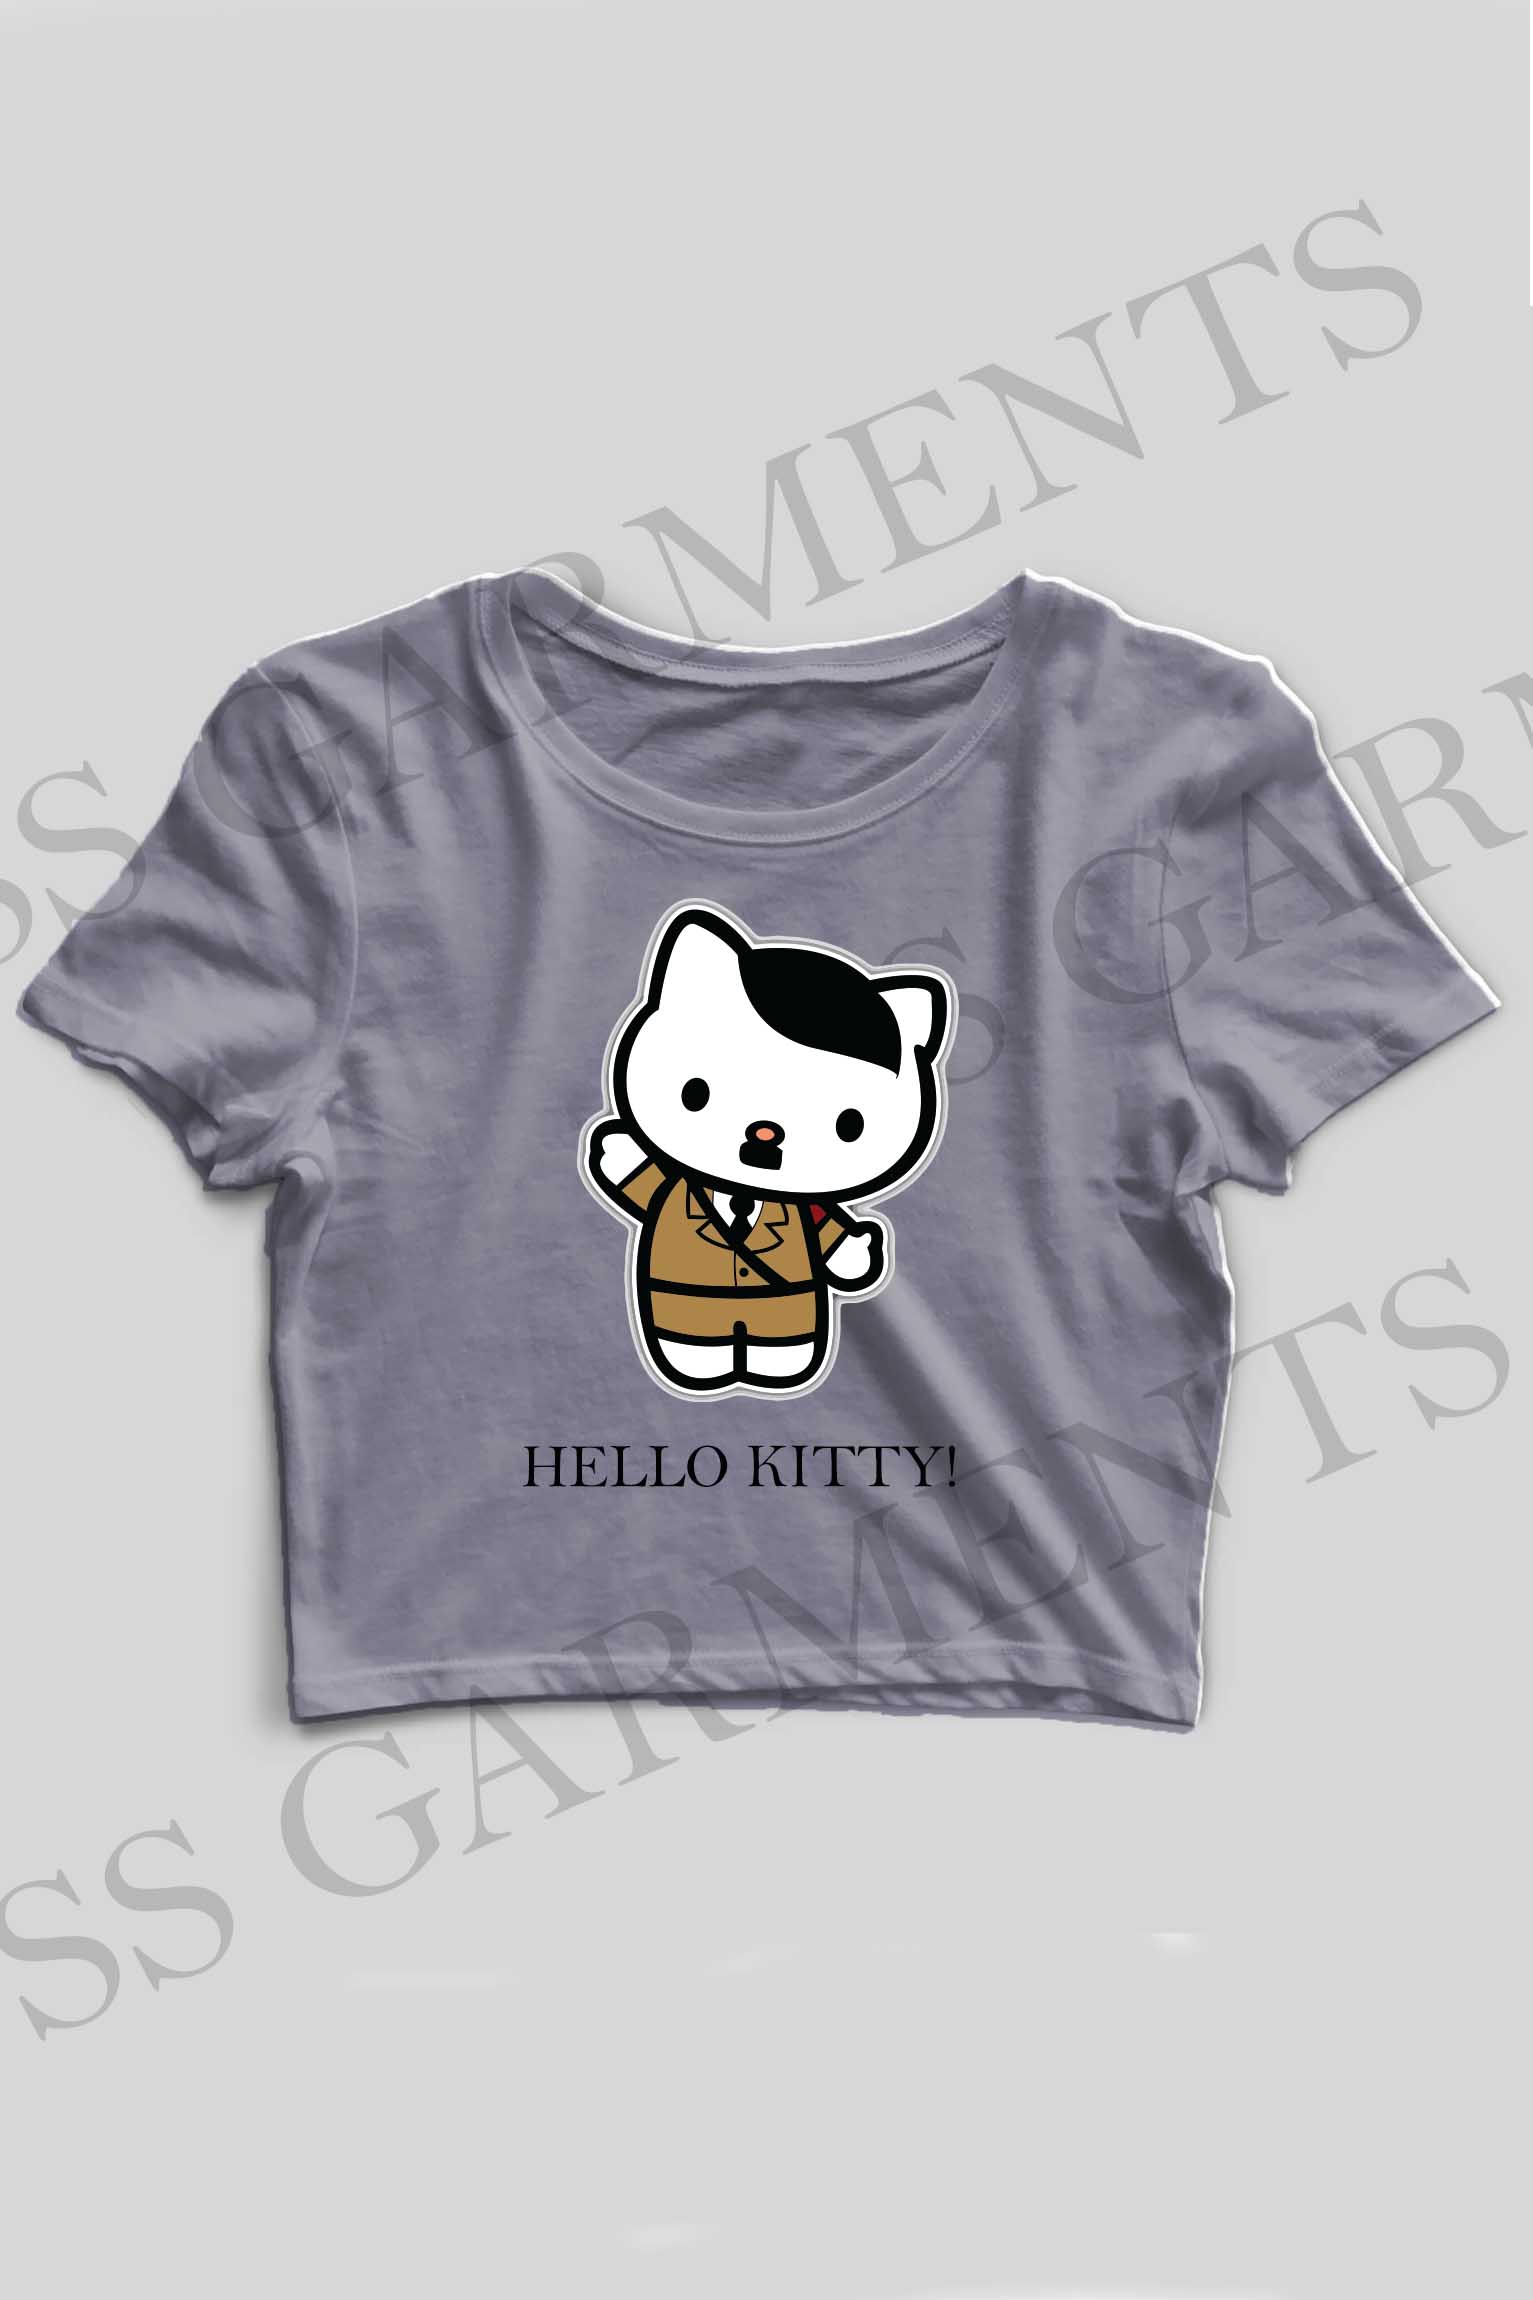 Crop Top Round Neck Cute Kitty Printed T-shirt